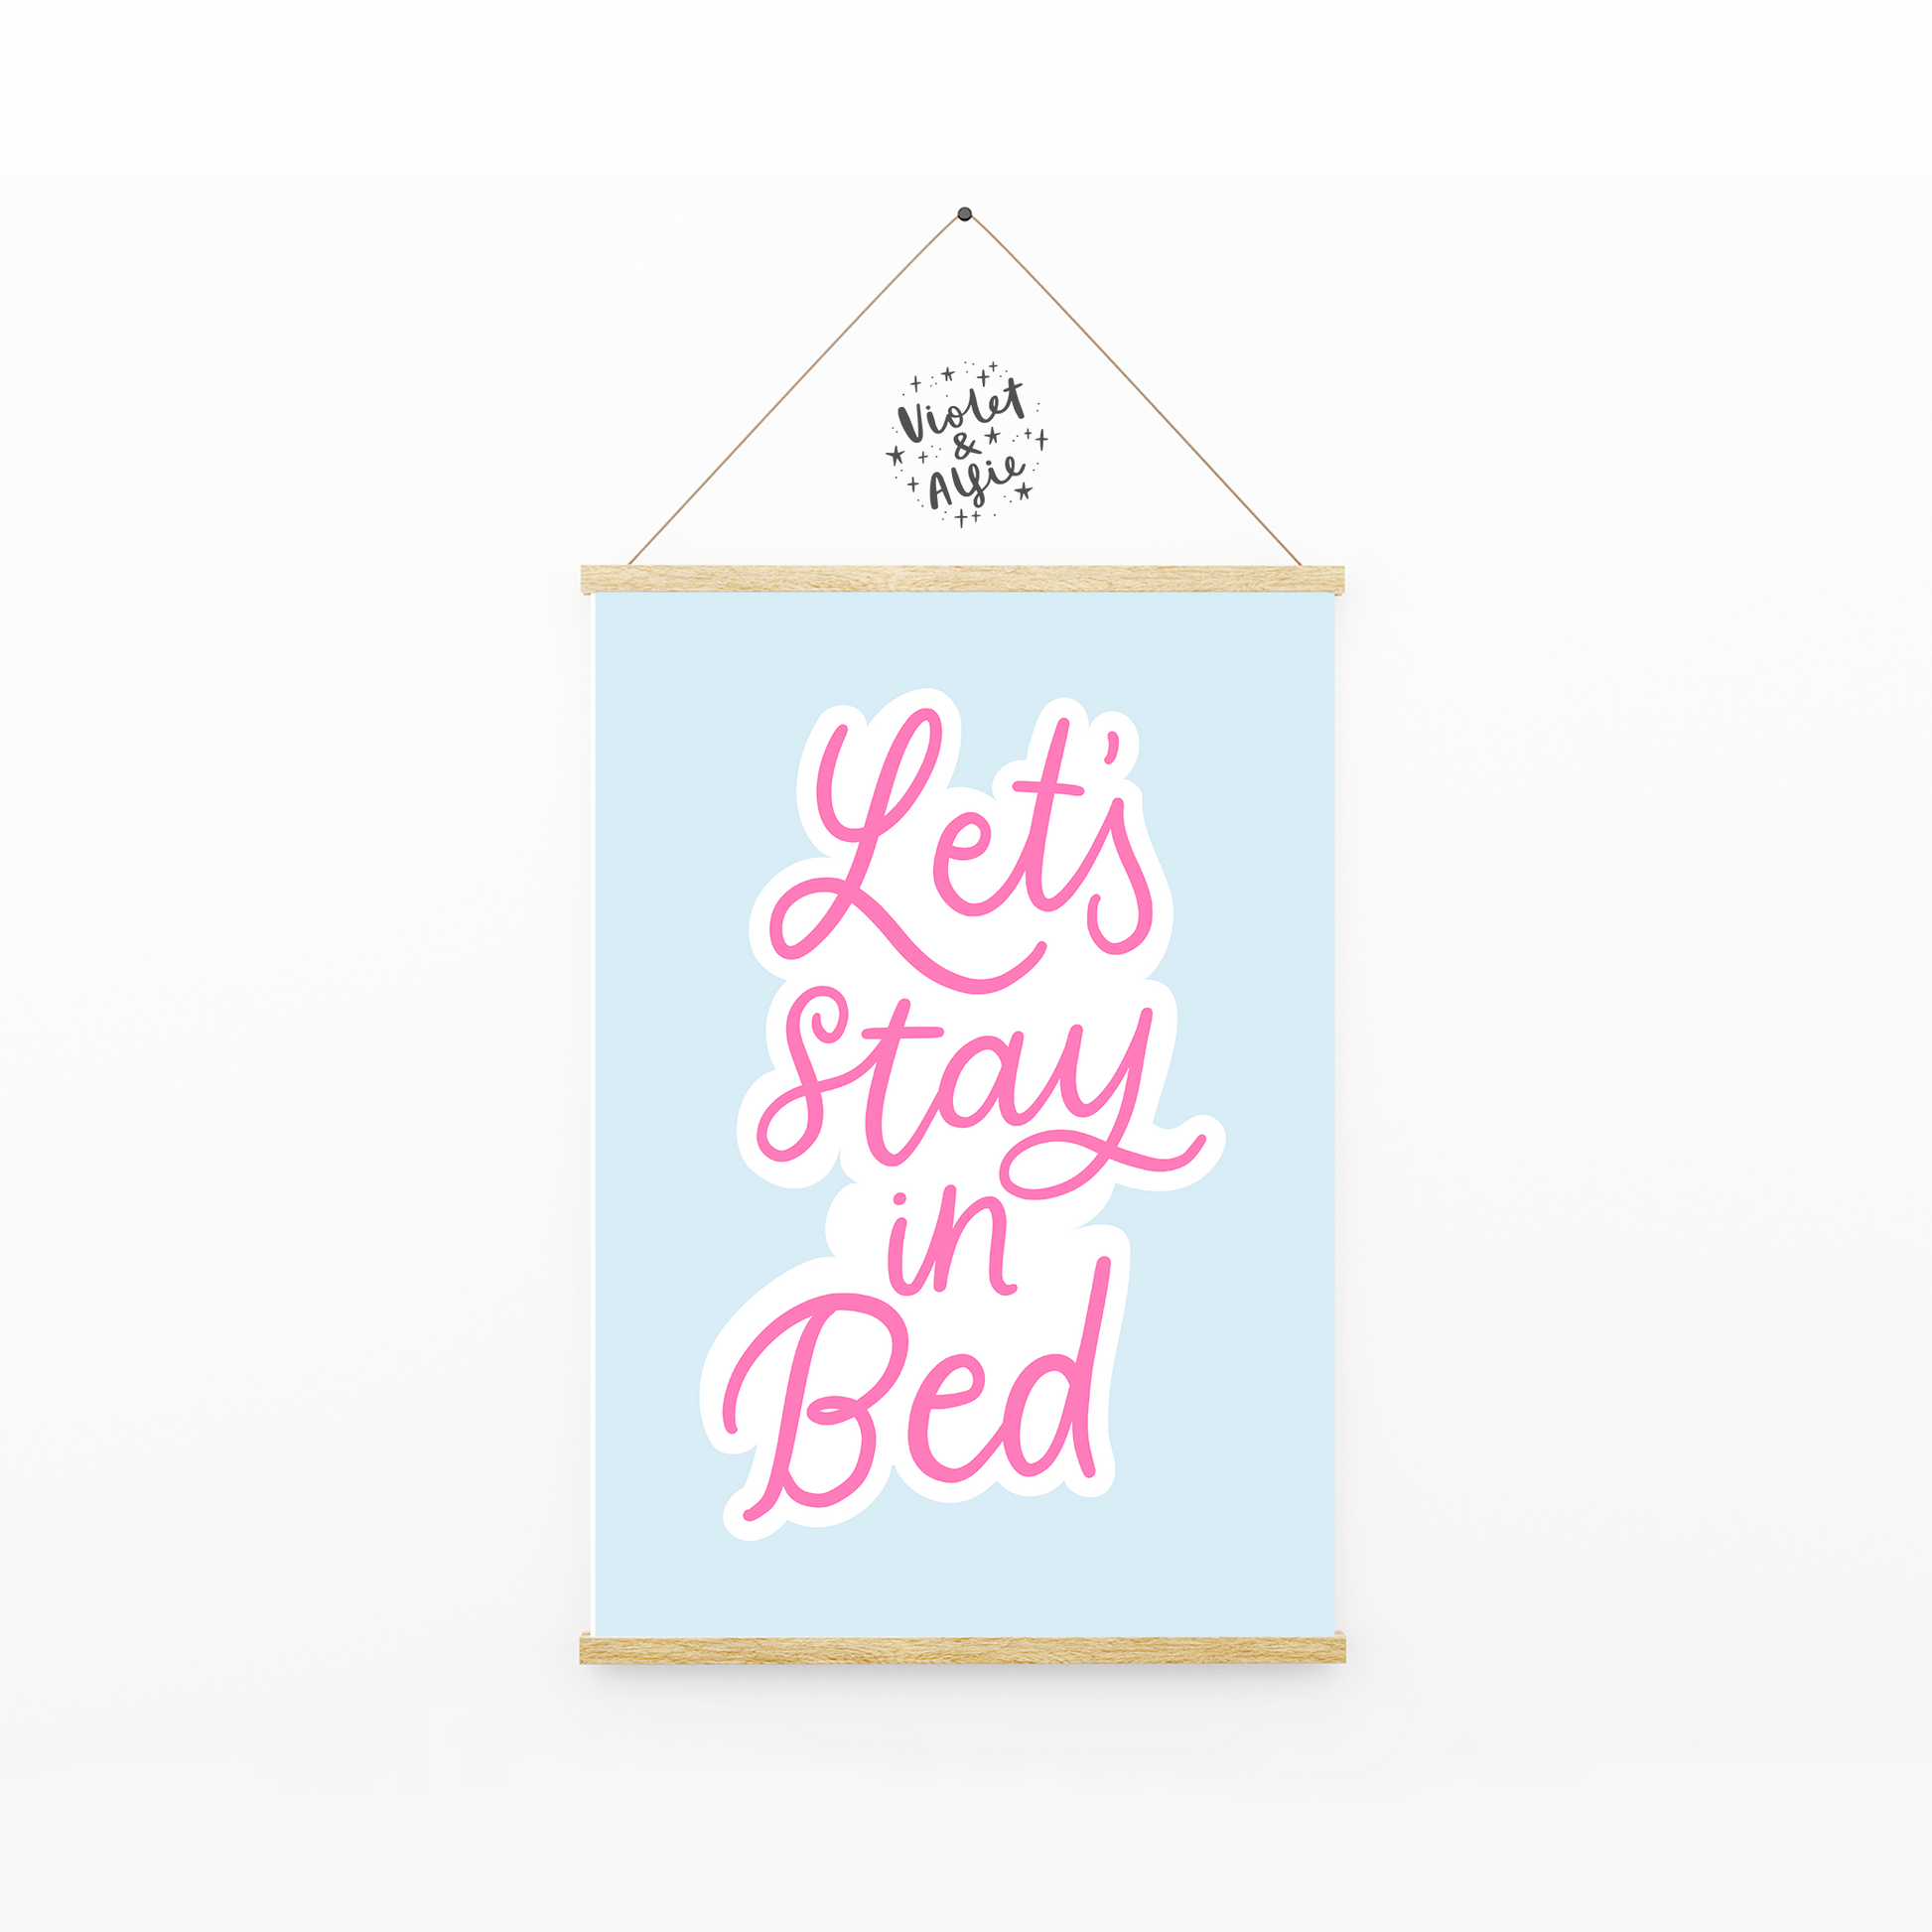 lets stay in bed print, bedroom wall art, couples bedroom wall art, stay in bed poster, sleep lover gift, colourful bedroom decor, pastel prints for bedroom, blue and pink prints